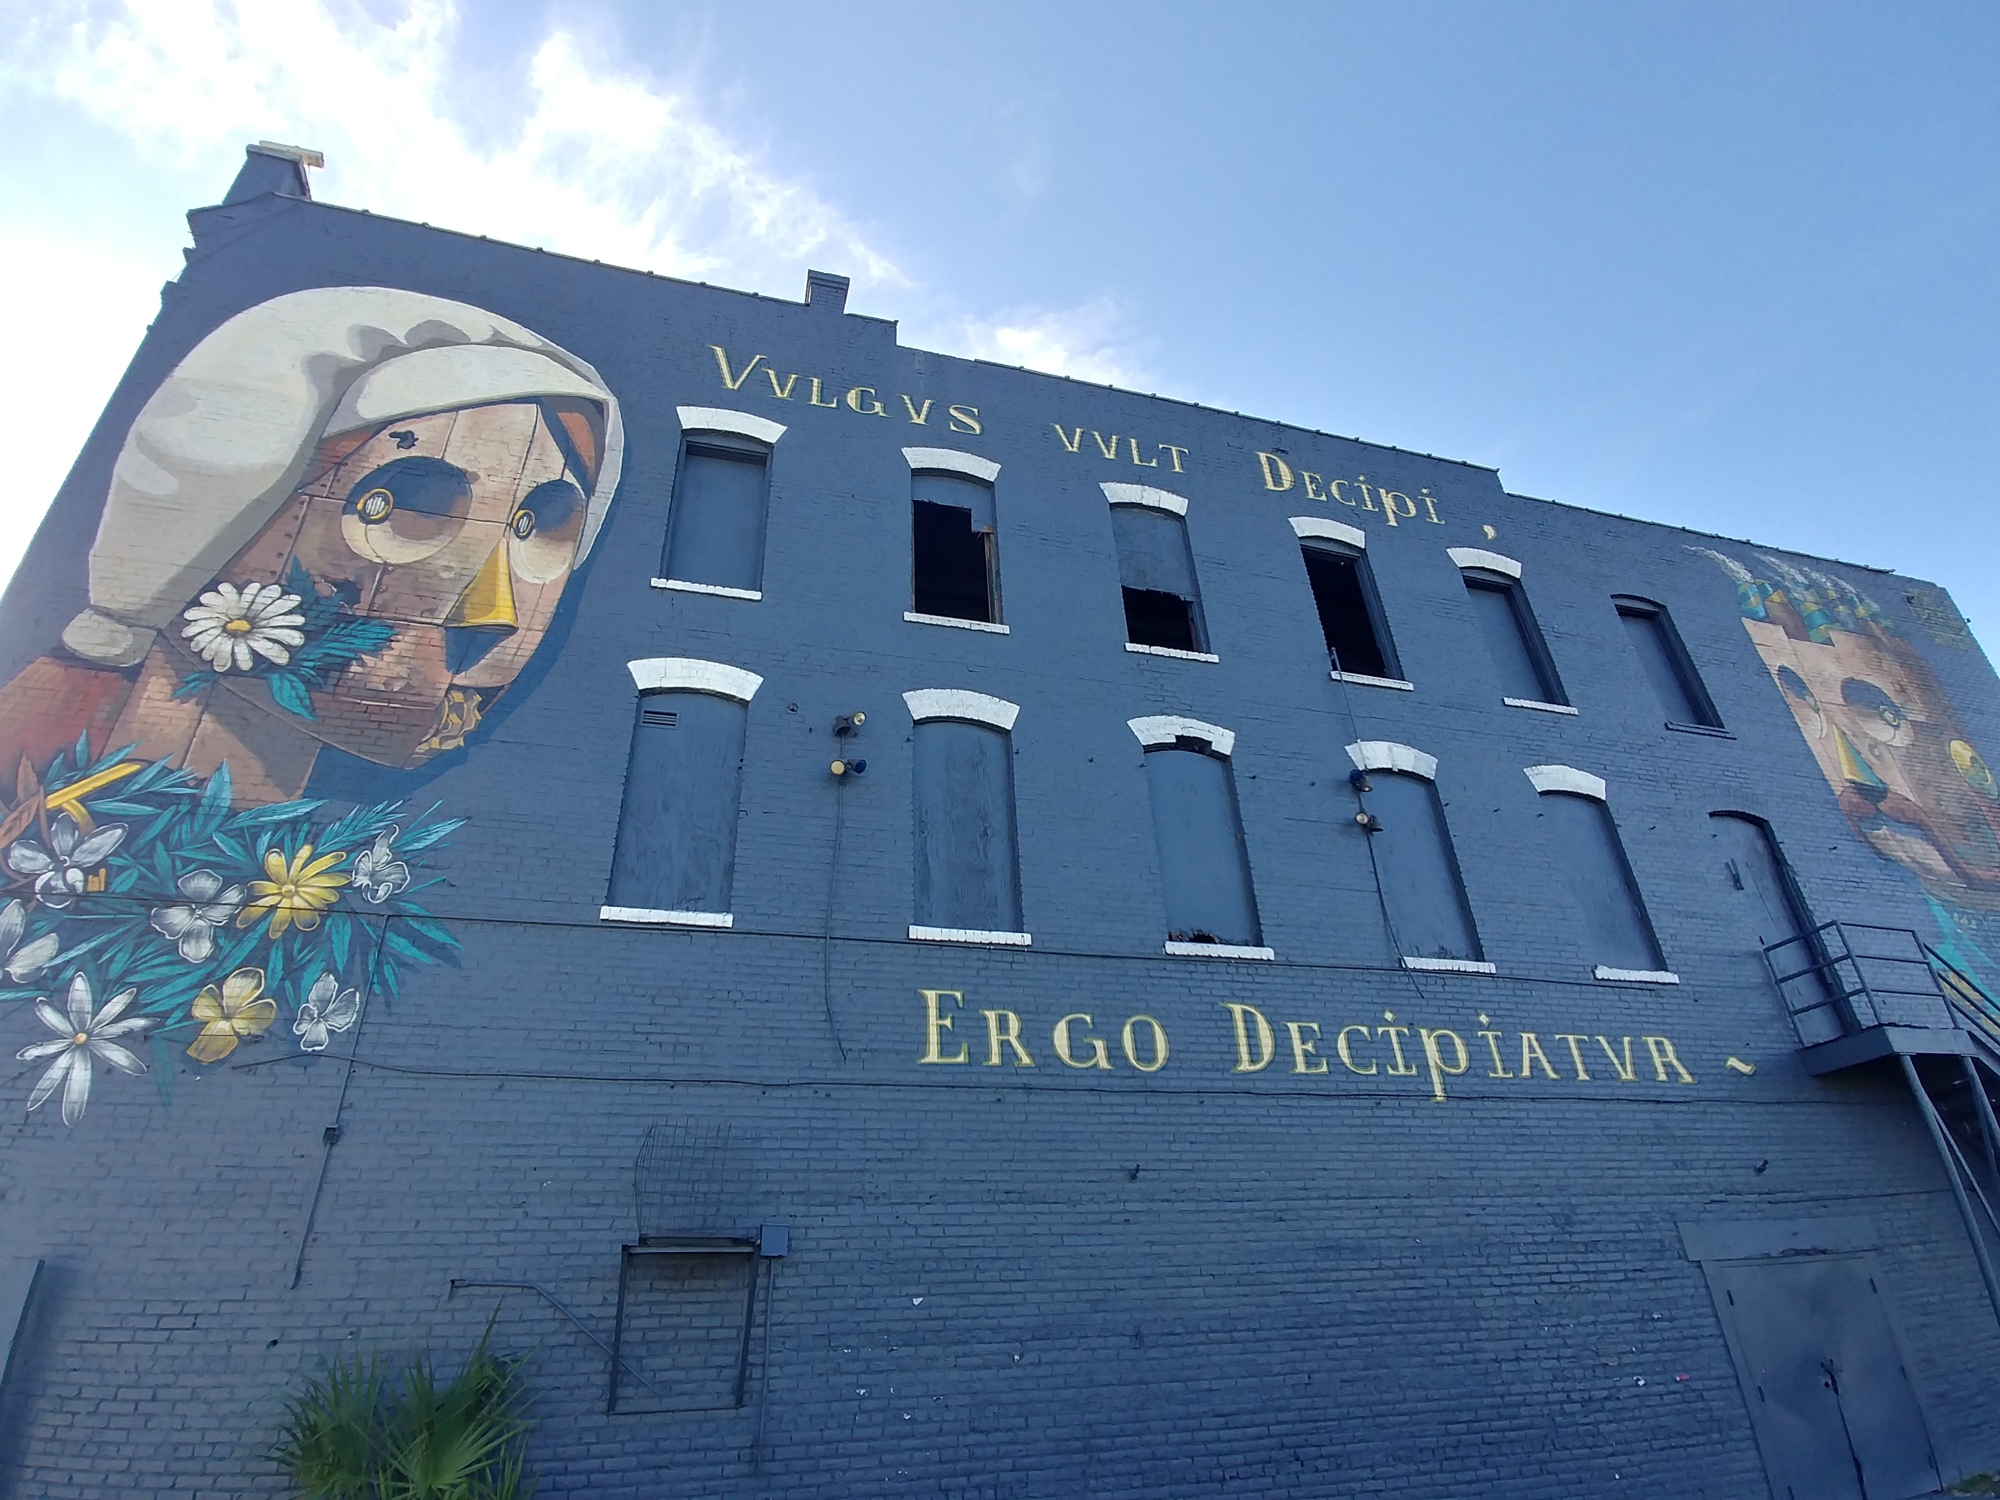 A mural painted on the side of the former nightclub.